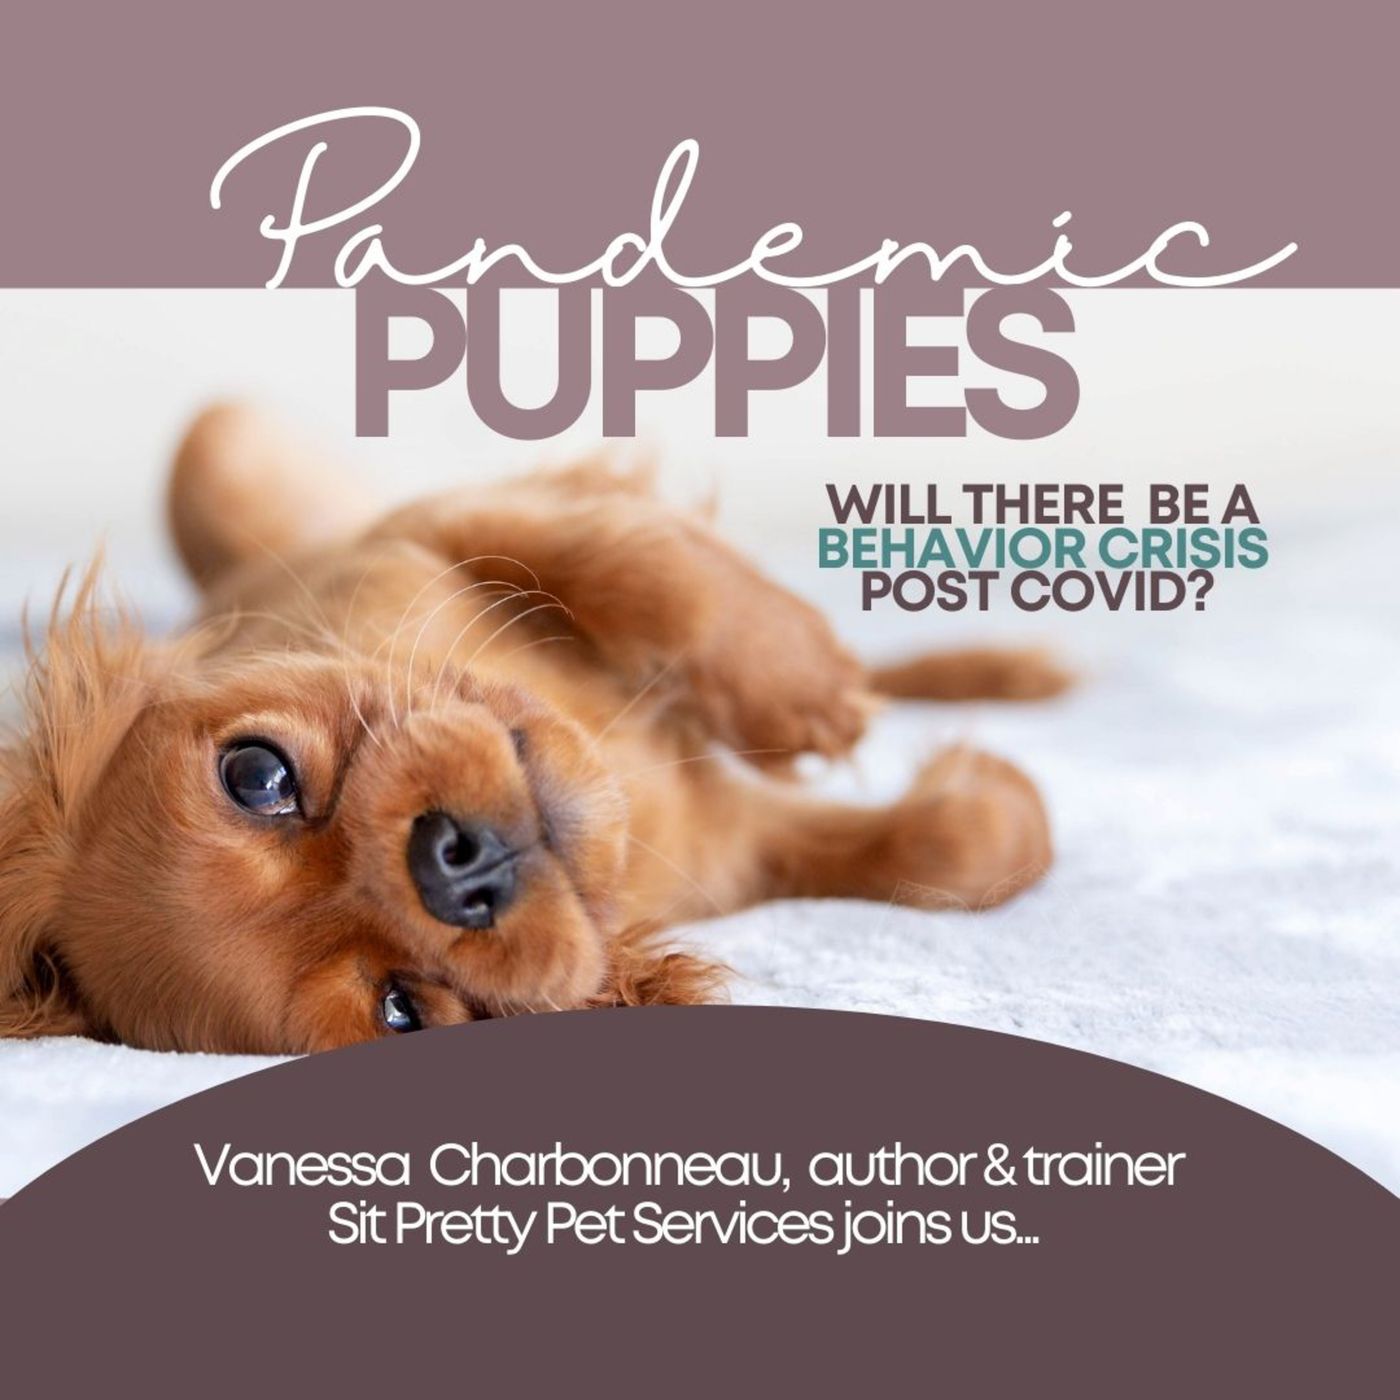 Pandemic Puppies: Will There Be A Behavioral Crisis?